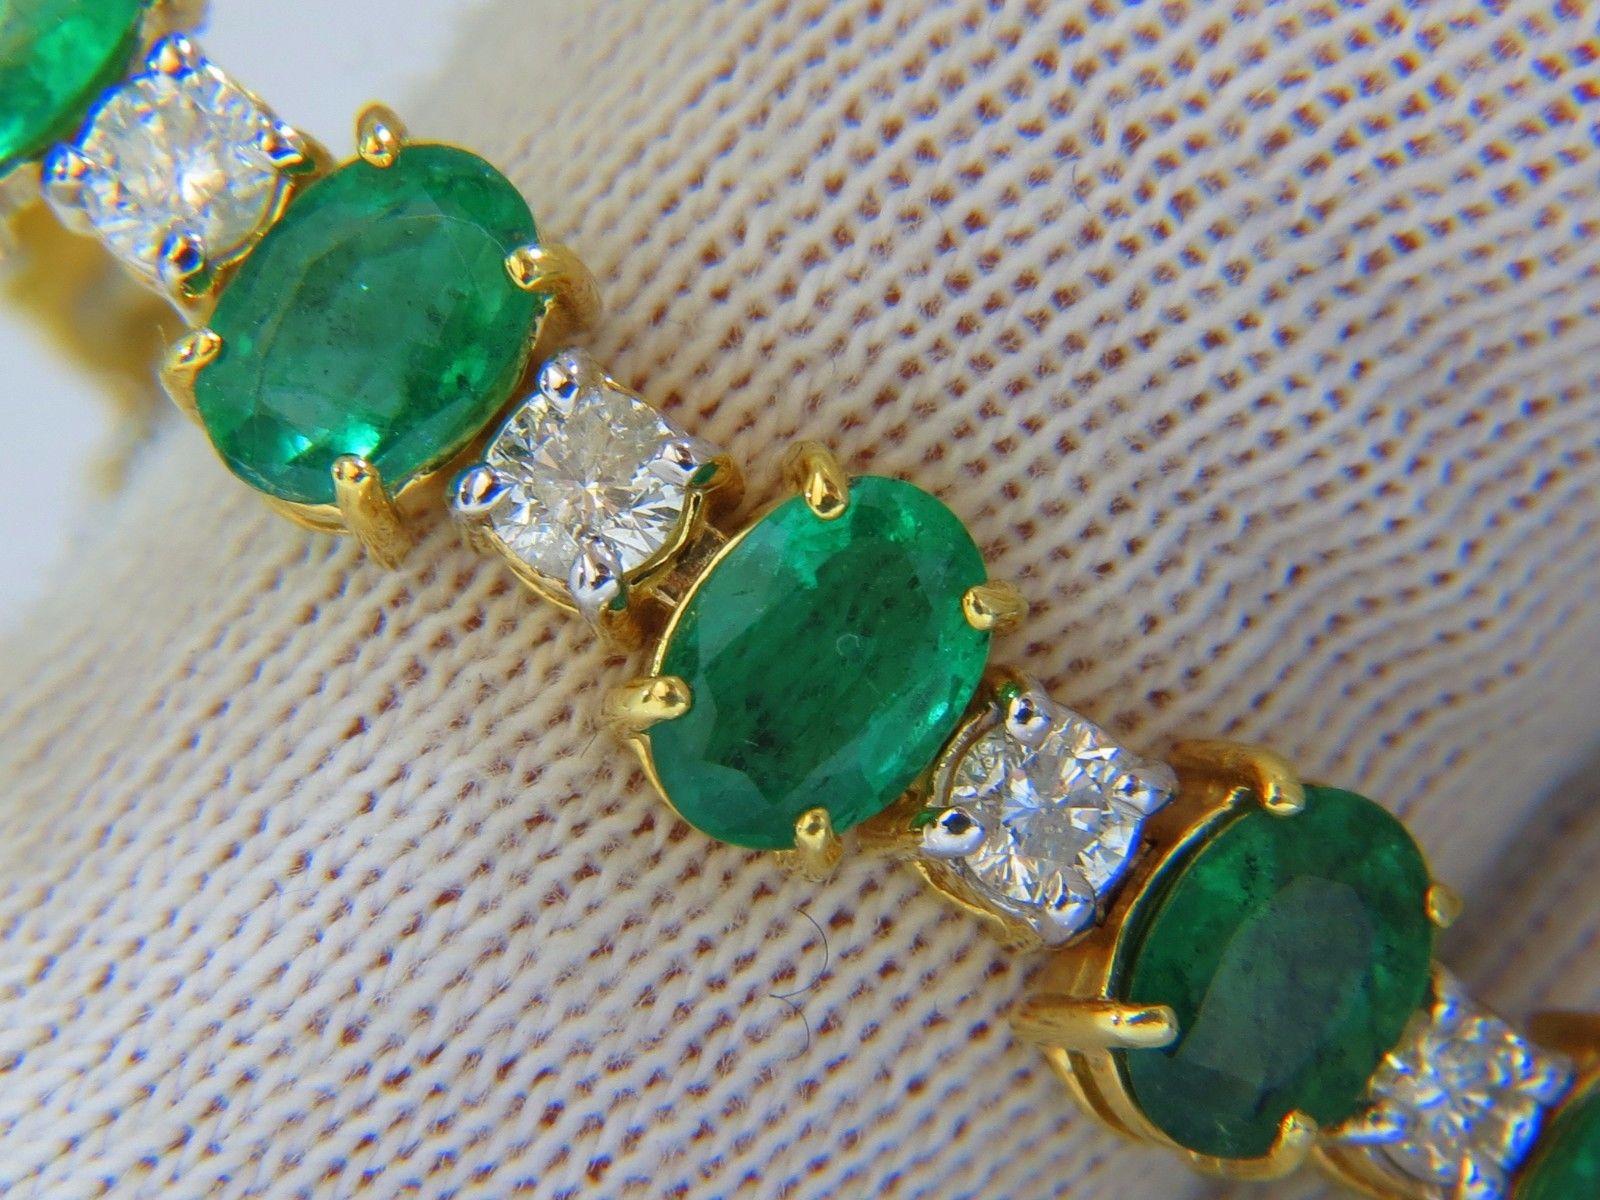 Emeralds & Diamonds Classic Tennis.

15.00ct. Natural emeralds bracelet.

Oval, full cuts 

Clean clarity

Transparent & Vivid Greens.

 average: 7 X 5mm

21 count.



3.00ct Diamonds

Rounds & full cuts

Si-2 clarity.

G-colors.

14kt. yellow gold